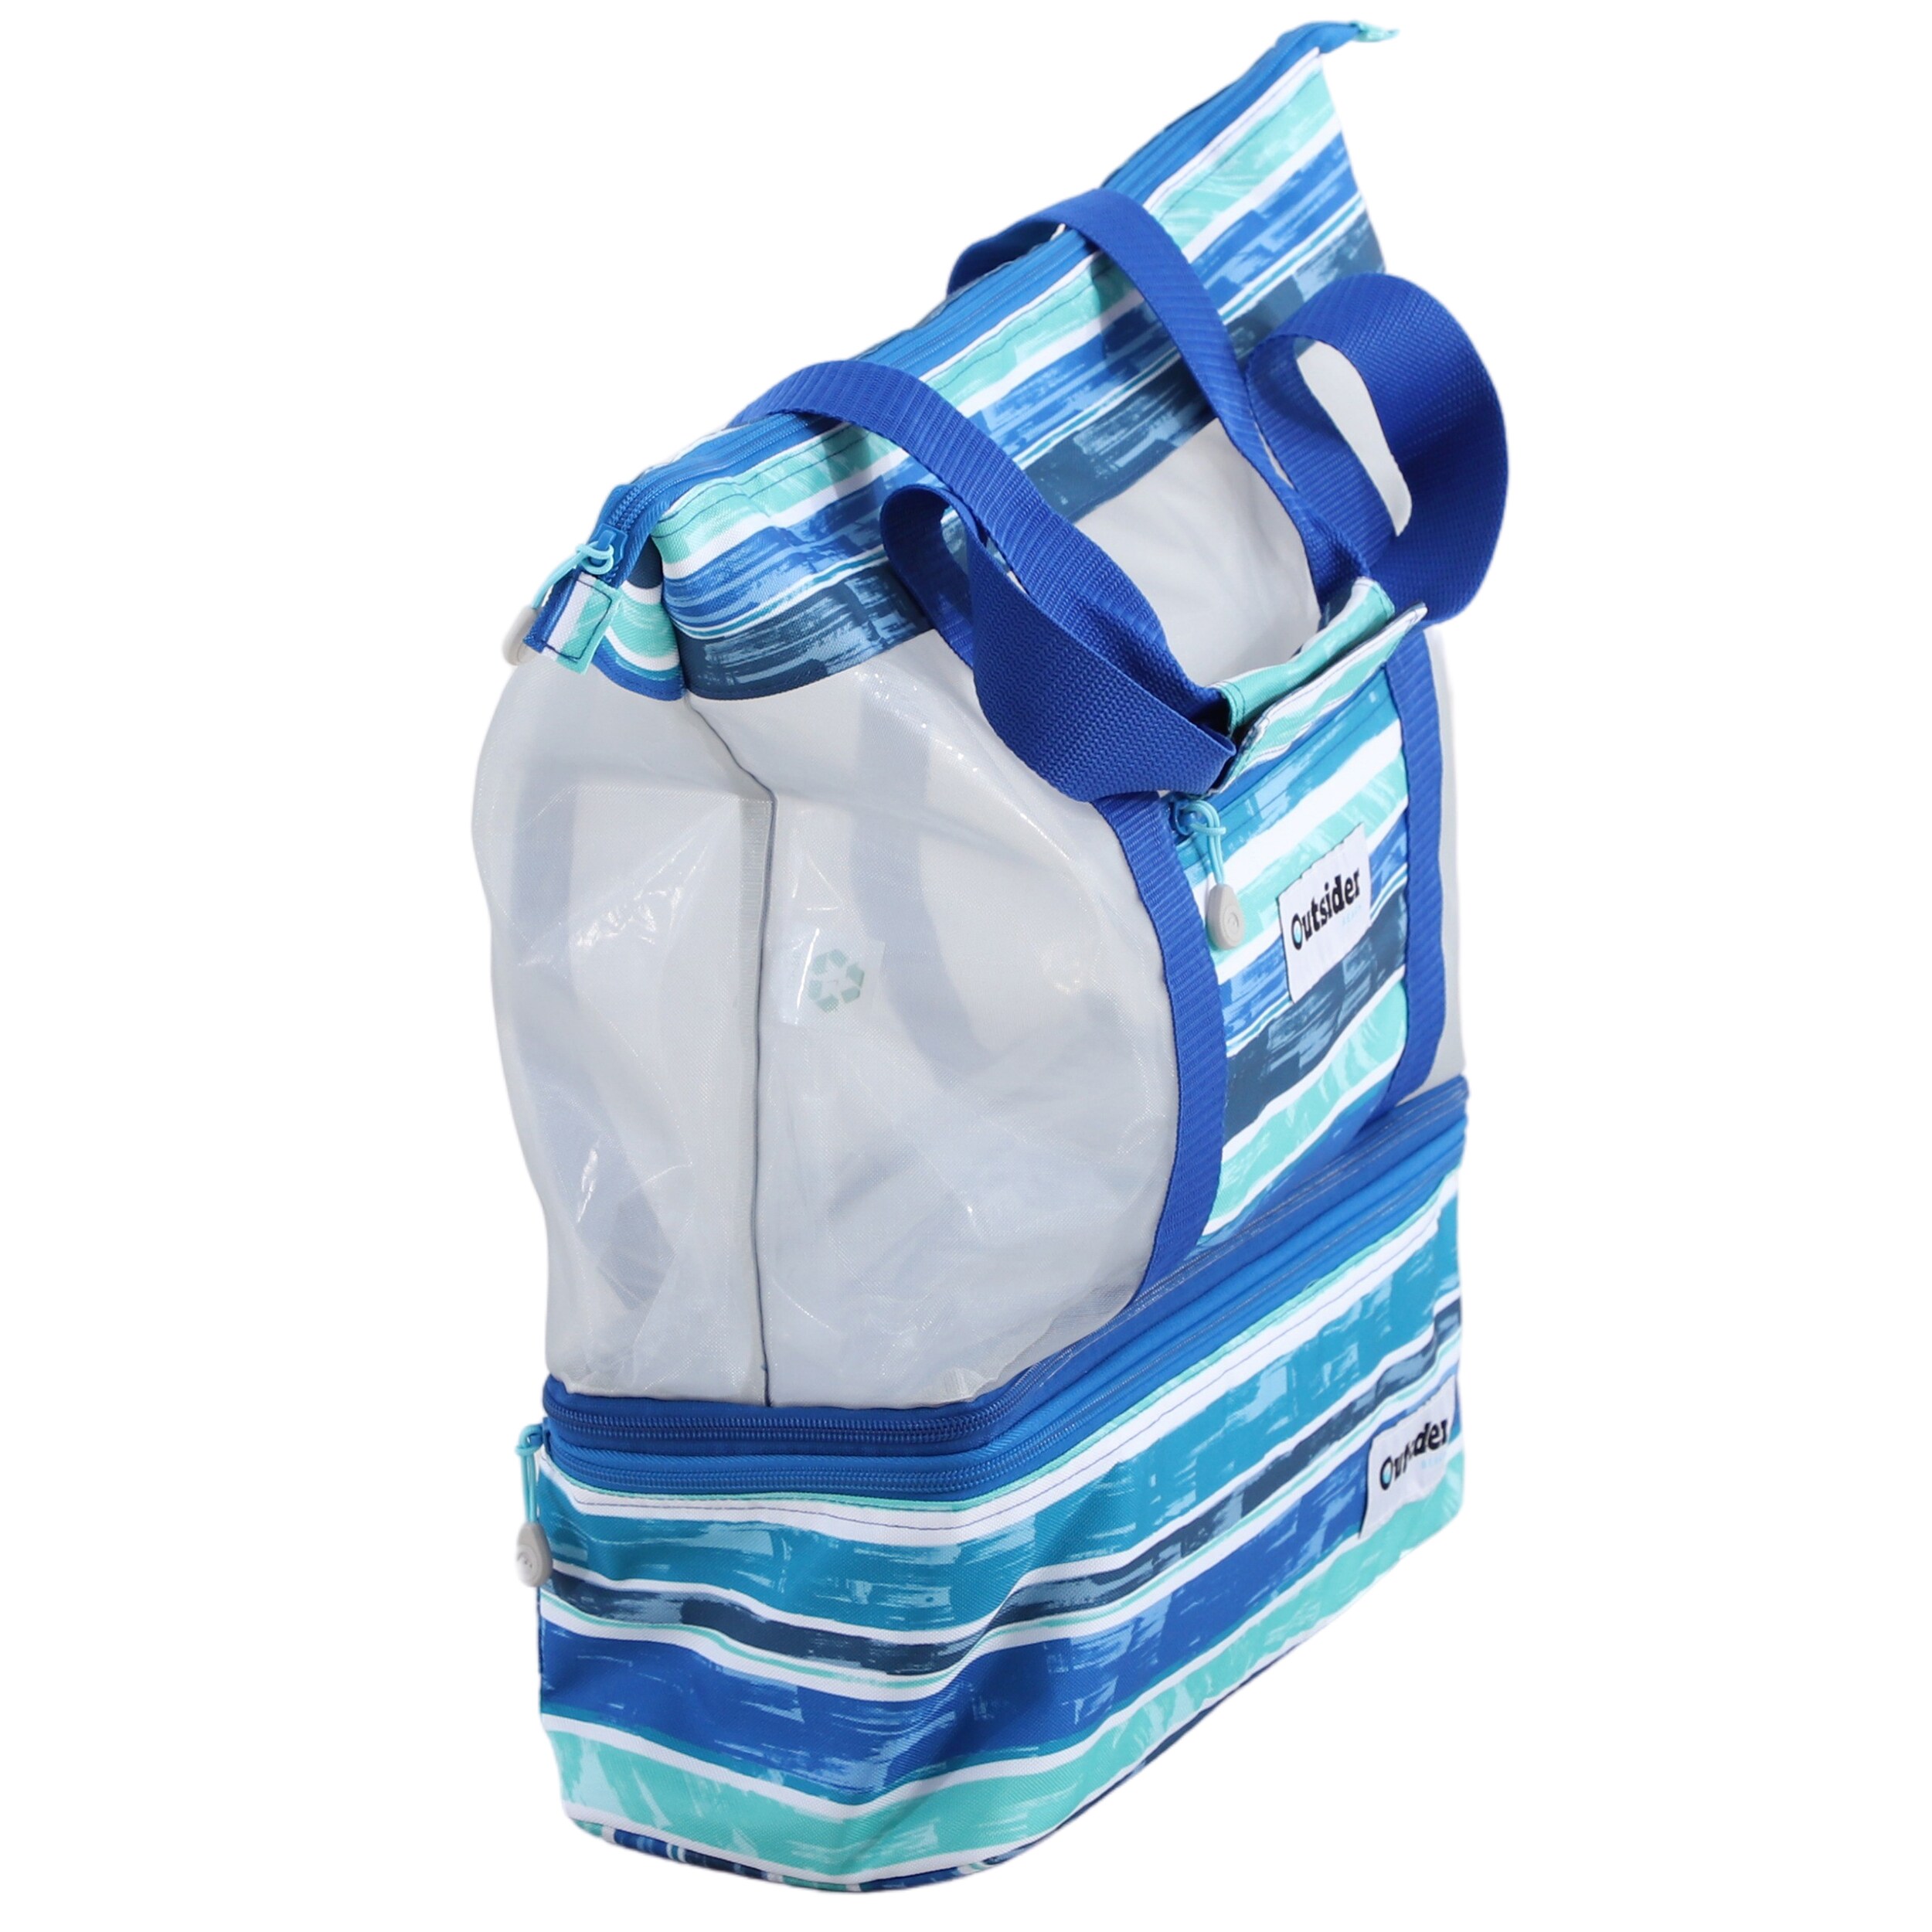 Kole Imports PLRPKQLTBLGN Polar Pack 12 Can Quilted Tote Bag Insulated Cooler in Blue/Green